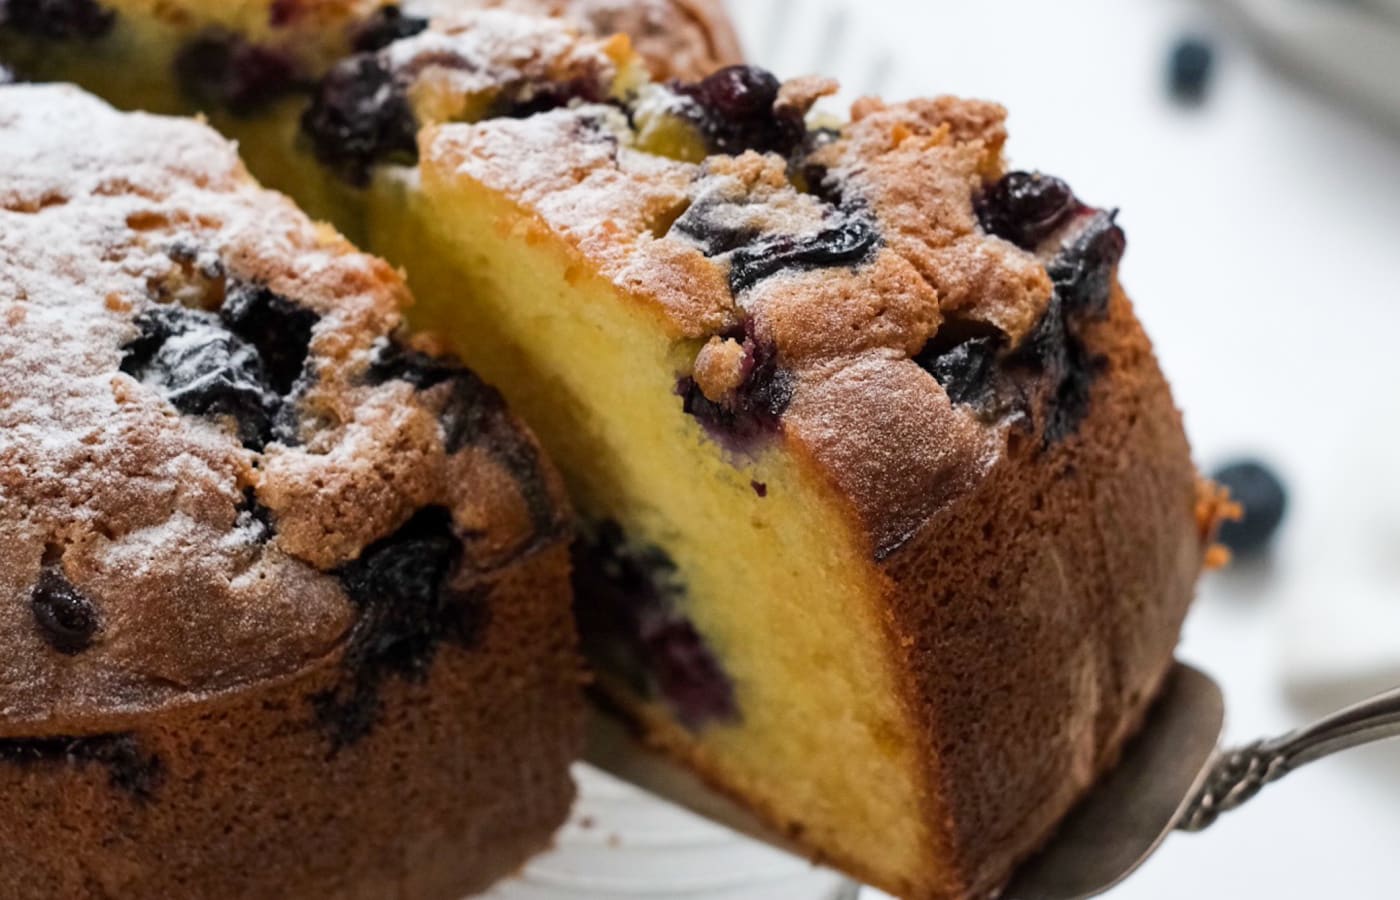 Best Blueberry Coffee Cake Recipe - How To Make Blueberry Coffee Cake